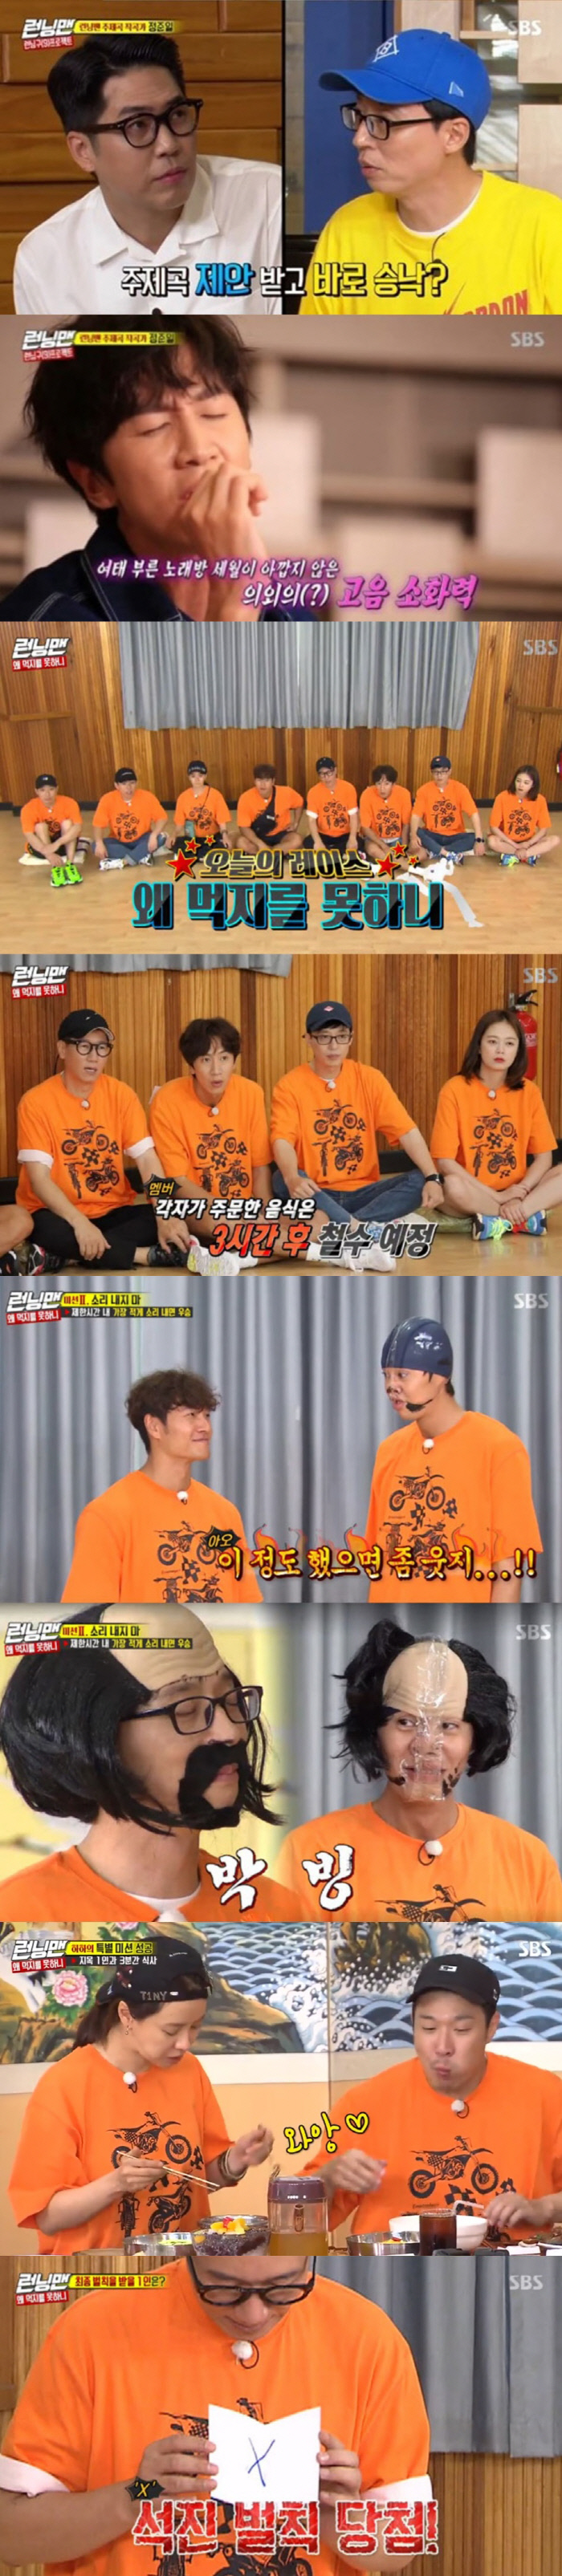 SBS Running Man took the top spot in the same time zone of 2049 Target Viewpoint, which was solid during the holiday season.According to Nielsen Korea, the ratings agency, Running Man, which aired on the 4th, soared to 7.4% of the highest audience rating per minute, and the 2049 target audience rating, an important indicator of major advertising officials, recorded 3.1% (based on the second part of the audience rating of households in the metropolitan area), beating all Masked Wang and Donkey Ears.Singer Jin Joon-Il, who will be a composer of the theme song Running Man, appeared on the show and attracted attention.Jeong Joon-Il released his first melody line to the members, saying, I liked Running Man and accepted it right when I received the theme song proposal.The members cheered, saying, Its really good, and raised expectations for the theme song Running Man, which will be combined with the members lyrics.In addition, the show also featured Race Why You Cant Eat.It was a mission that only needed to eat the food in front of it for a long time, but as the fate was decided by the Bokbokbok card, a fierce food competition between the members was held.In particular, the second round mission, Do not Scream, should not be made, and the Makeup Show was held for a long time, and Choi Soo-in, who shines in the National Athletics Championship 2, participated in the event, making the members confused with his amazing running skills.Meanwhile, Haha and Song Ji-hyo succeeded in eating as a result of the race final, and this scene was the highest audience rating of 7.4% per minute, which was the best one minute.Ji Seok-jin won the penalty and will perform a makeup show when he appears as a guest at Running Man fan meeting Running District, which will be held on the 26th (Mon).Running Man is receiving an application for the 9th anniversary Korean fan meeting Running Districts participation in viewers through its official website until the 10th.More information can be found on the official website of Running Man.